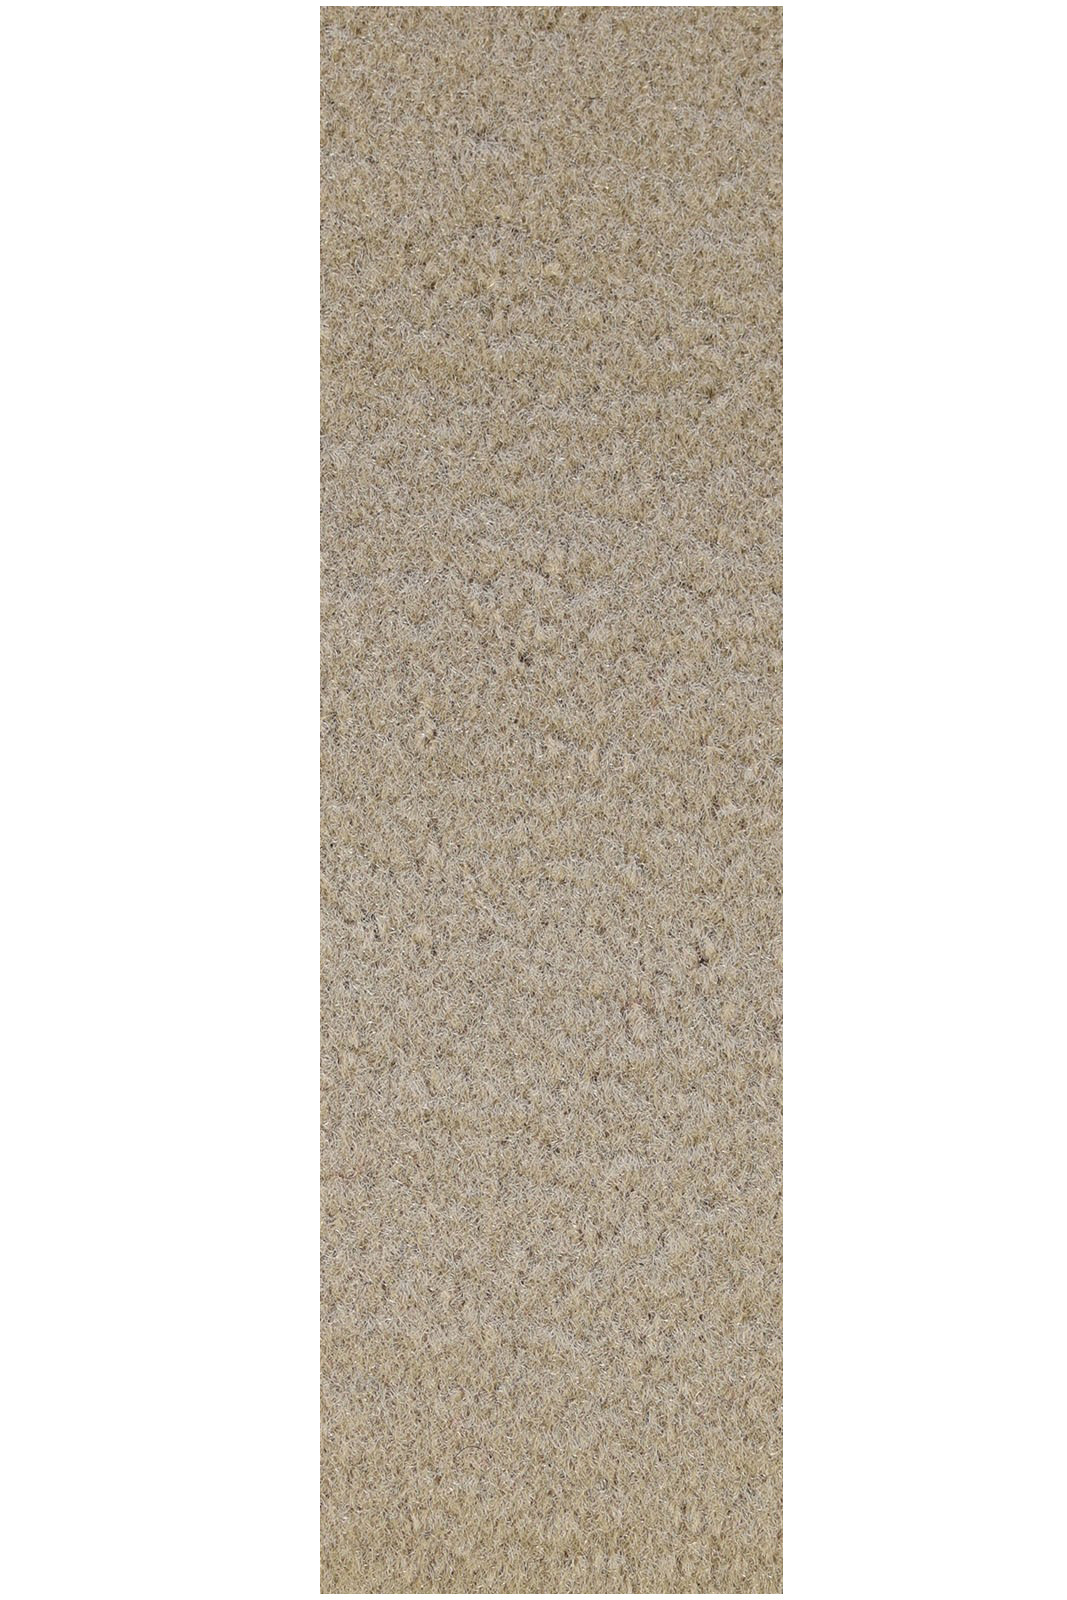 Commercial Indoor/Outdoor Beige Custom Size Runner 2'6" x24' - Area Rug with Rubber Marine Backing for Patio, Porch, Deck, Boat, Basement or Garage with Premium Bound Polyester Edges - image 1 of 1